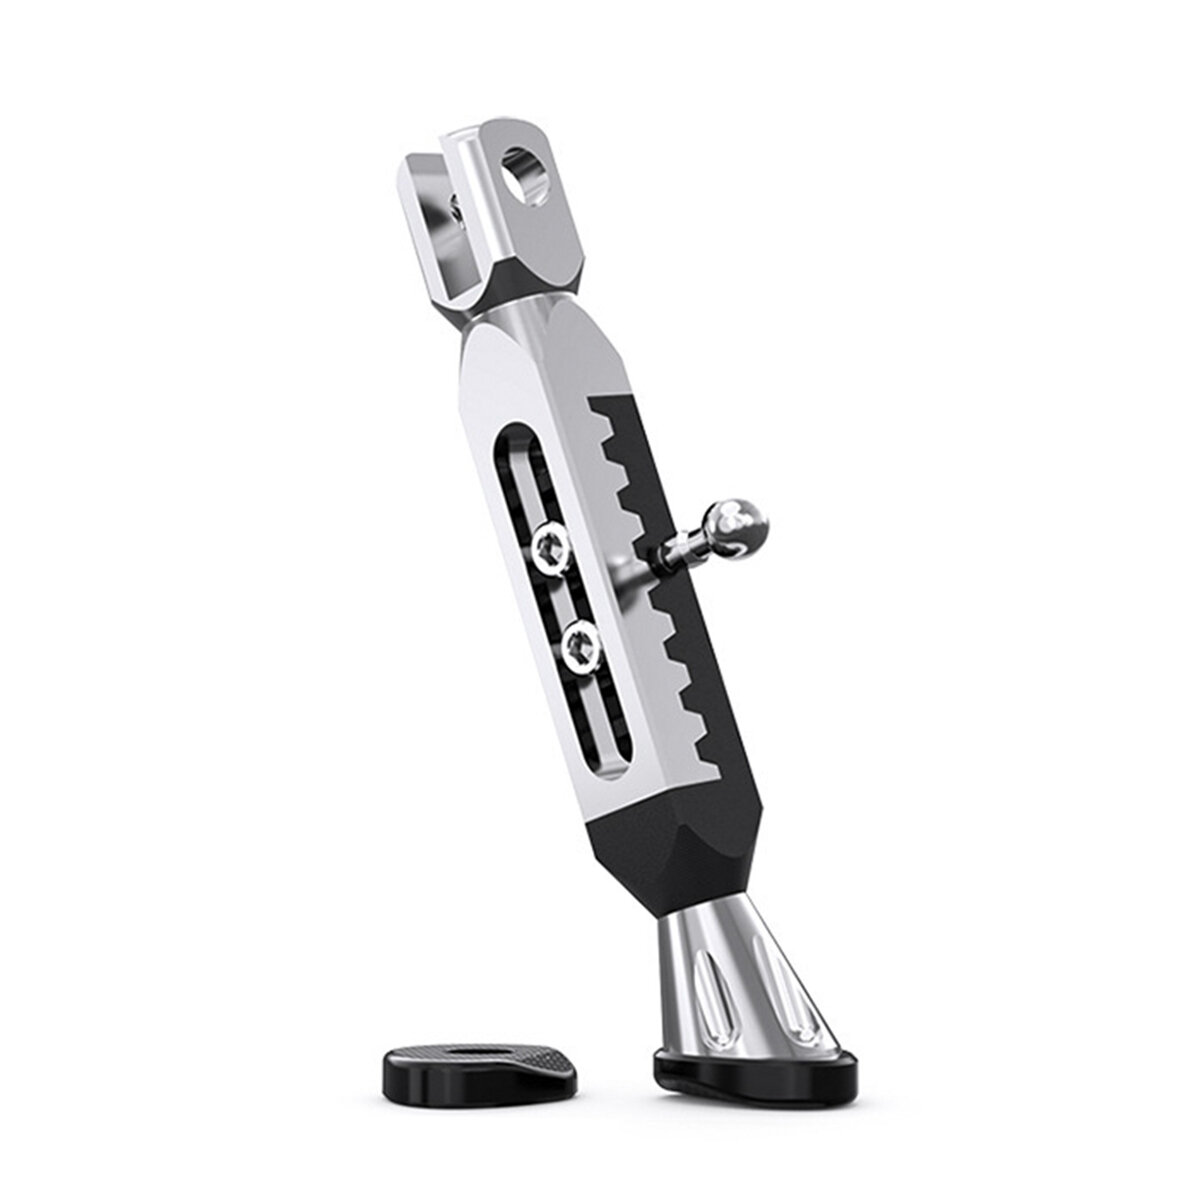 Height Adjustable CNC Aluminum Alloy Kickstand Foot Side Stand for Motorcycle, Banggood  - buy with discount